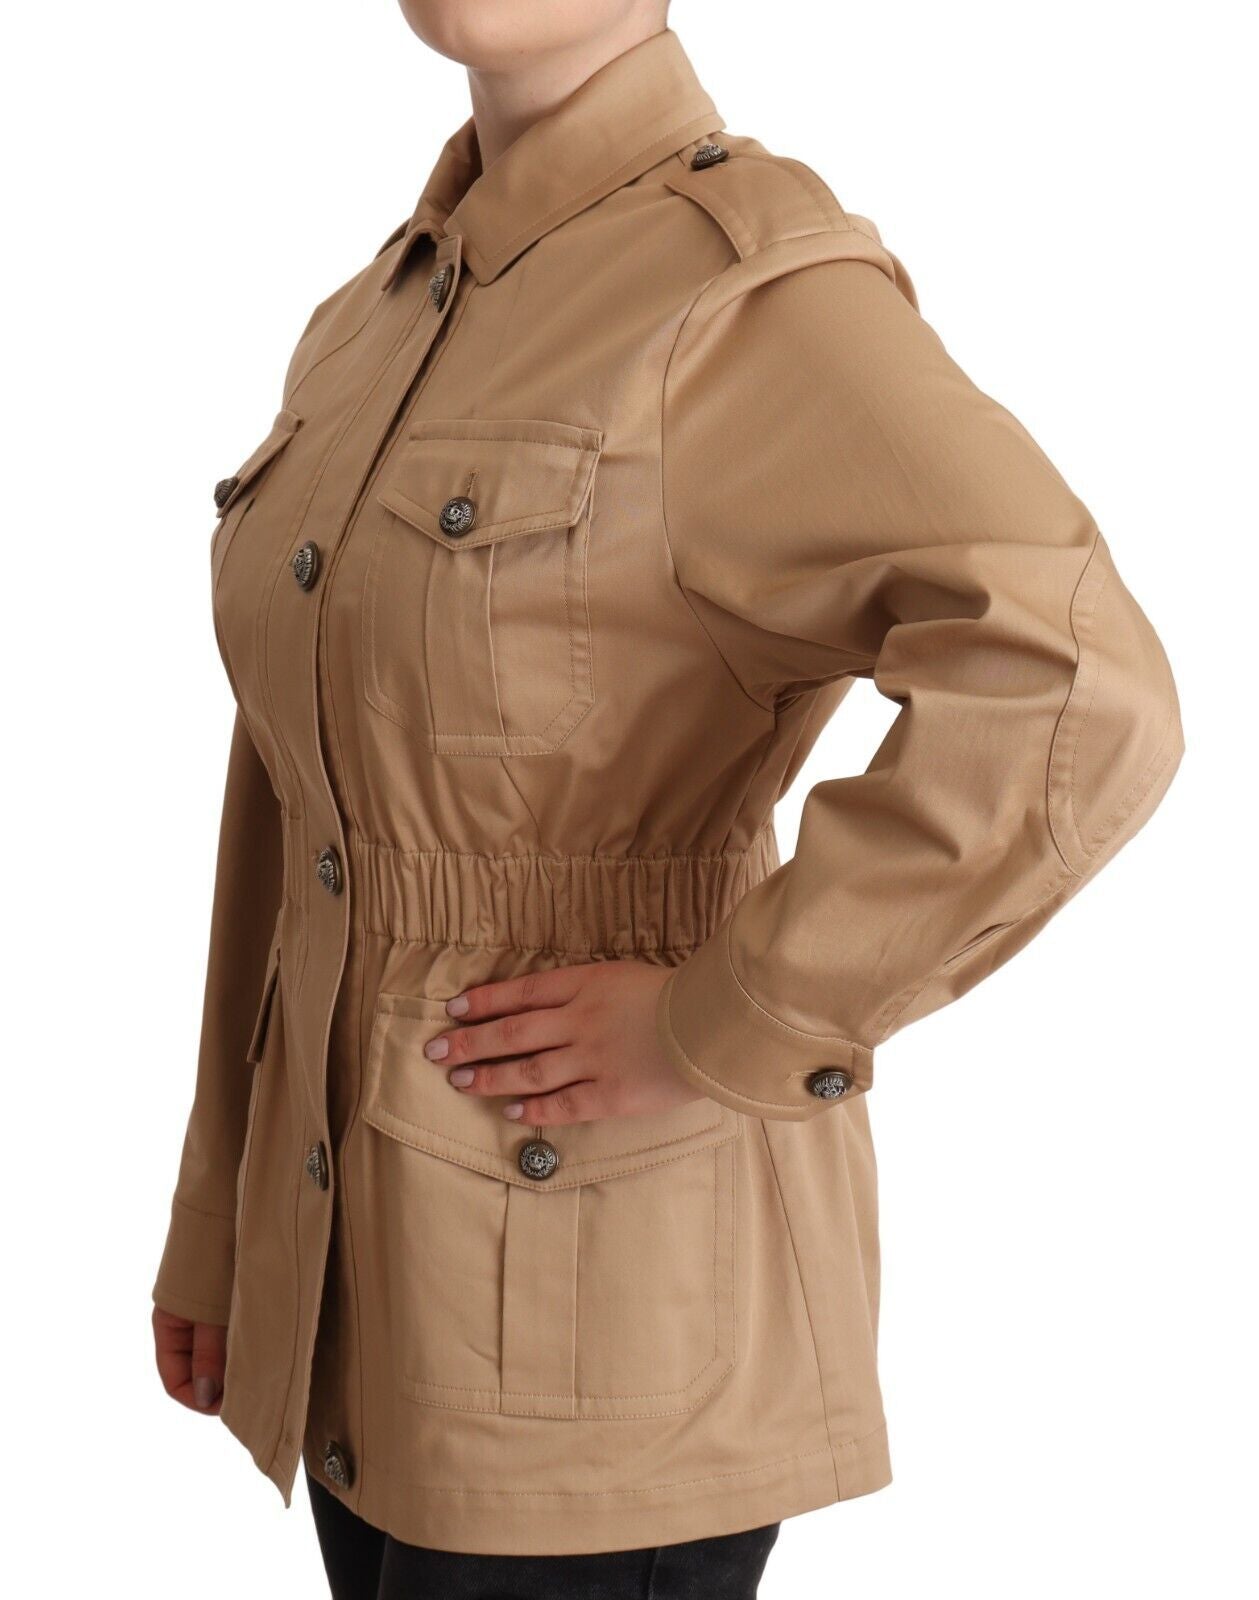 Chic Beige Button Down Coat with Embellishments